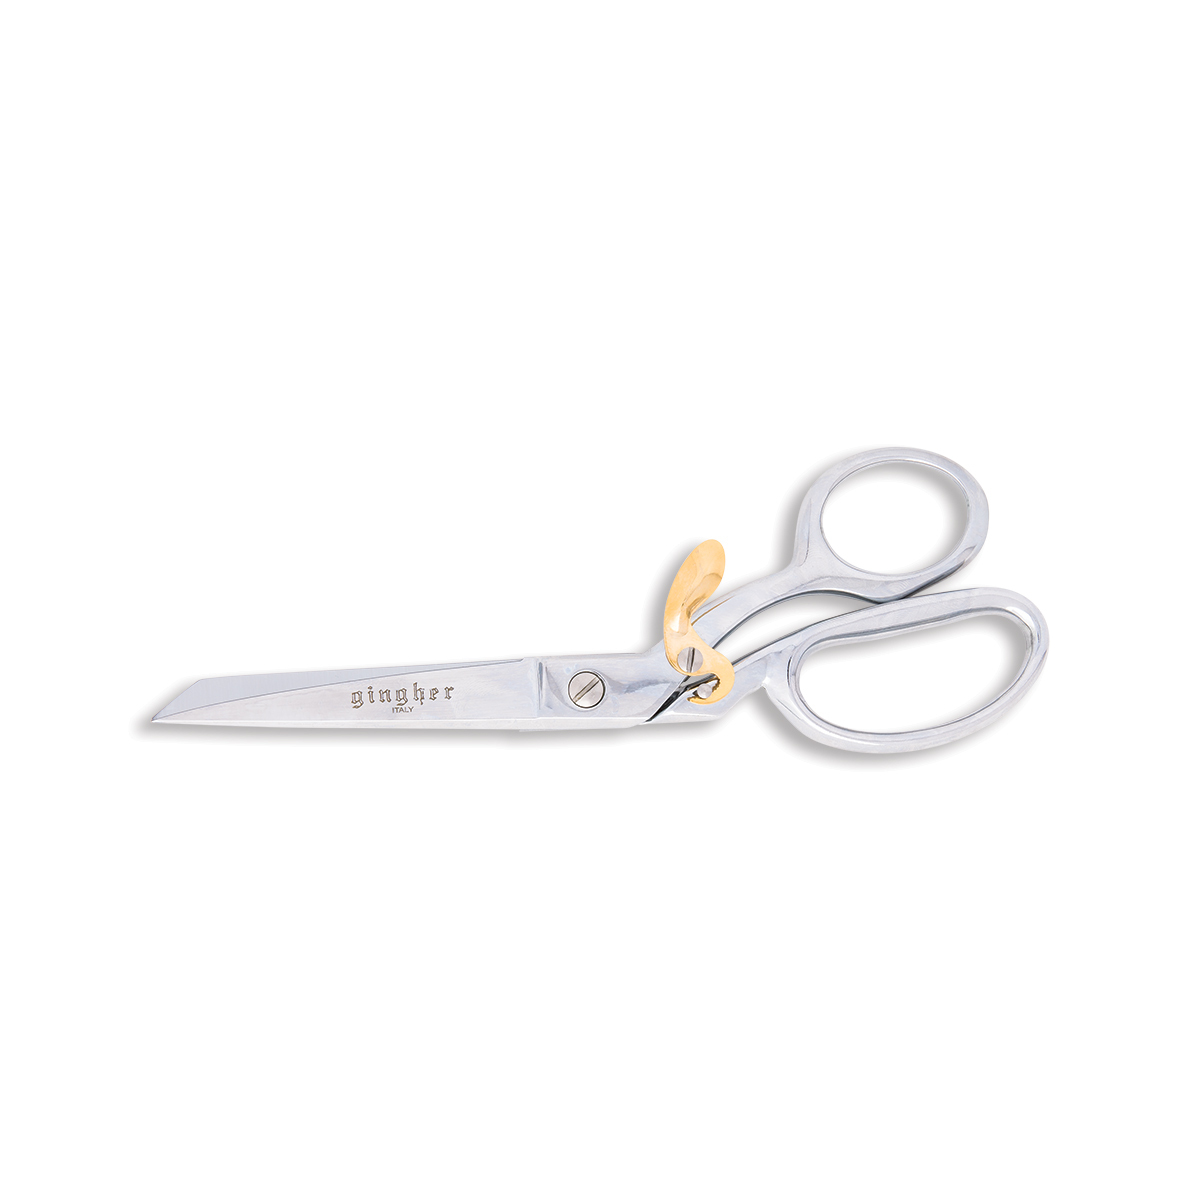 Gingher Knife Edge Spring Action Trimmers - 8 - WAWAK Sewing Supplies